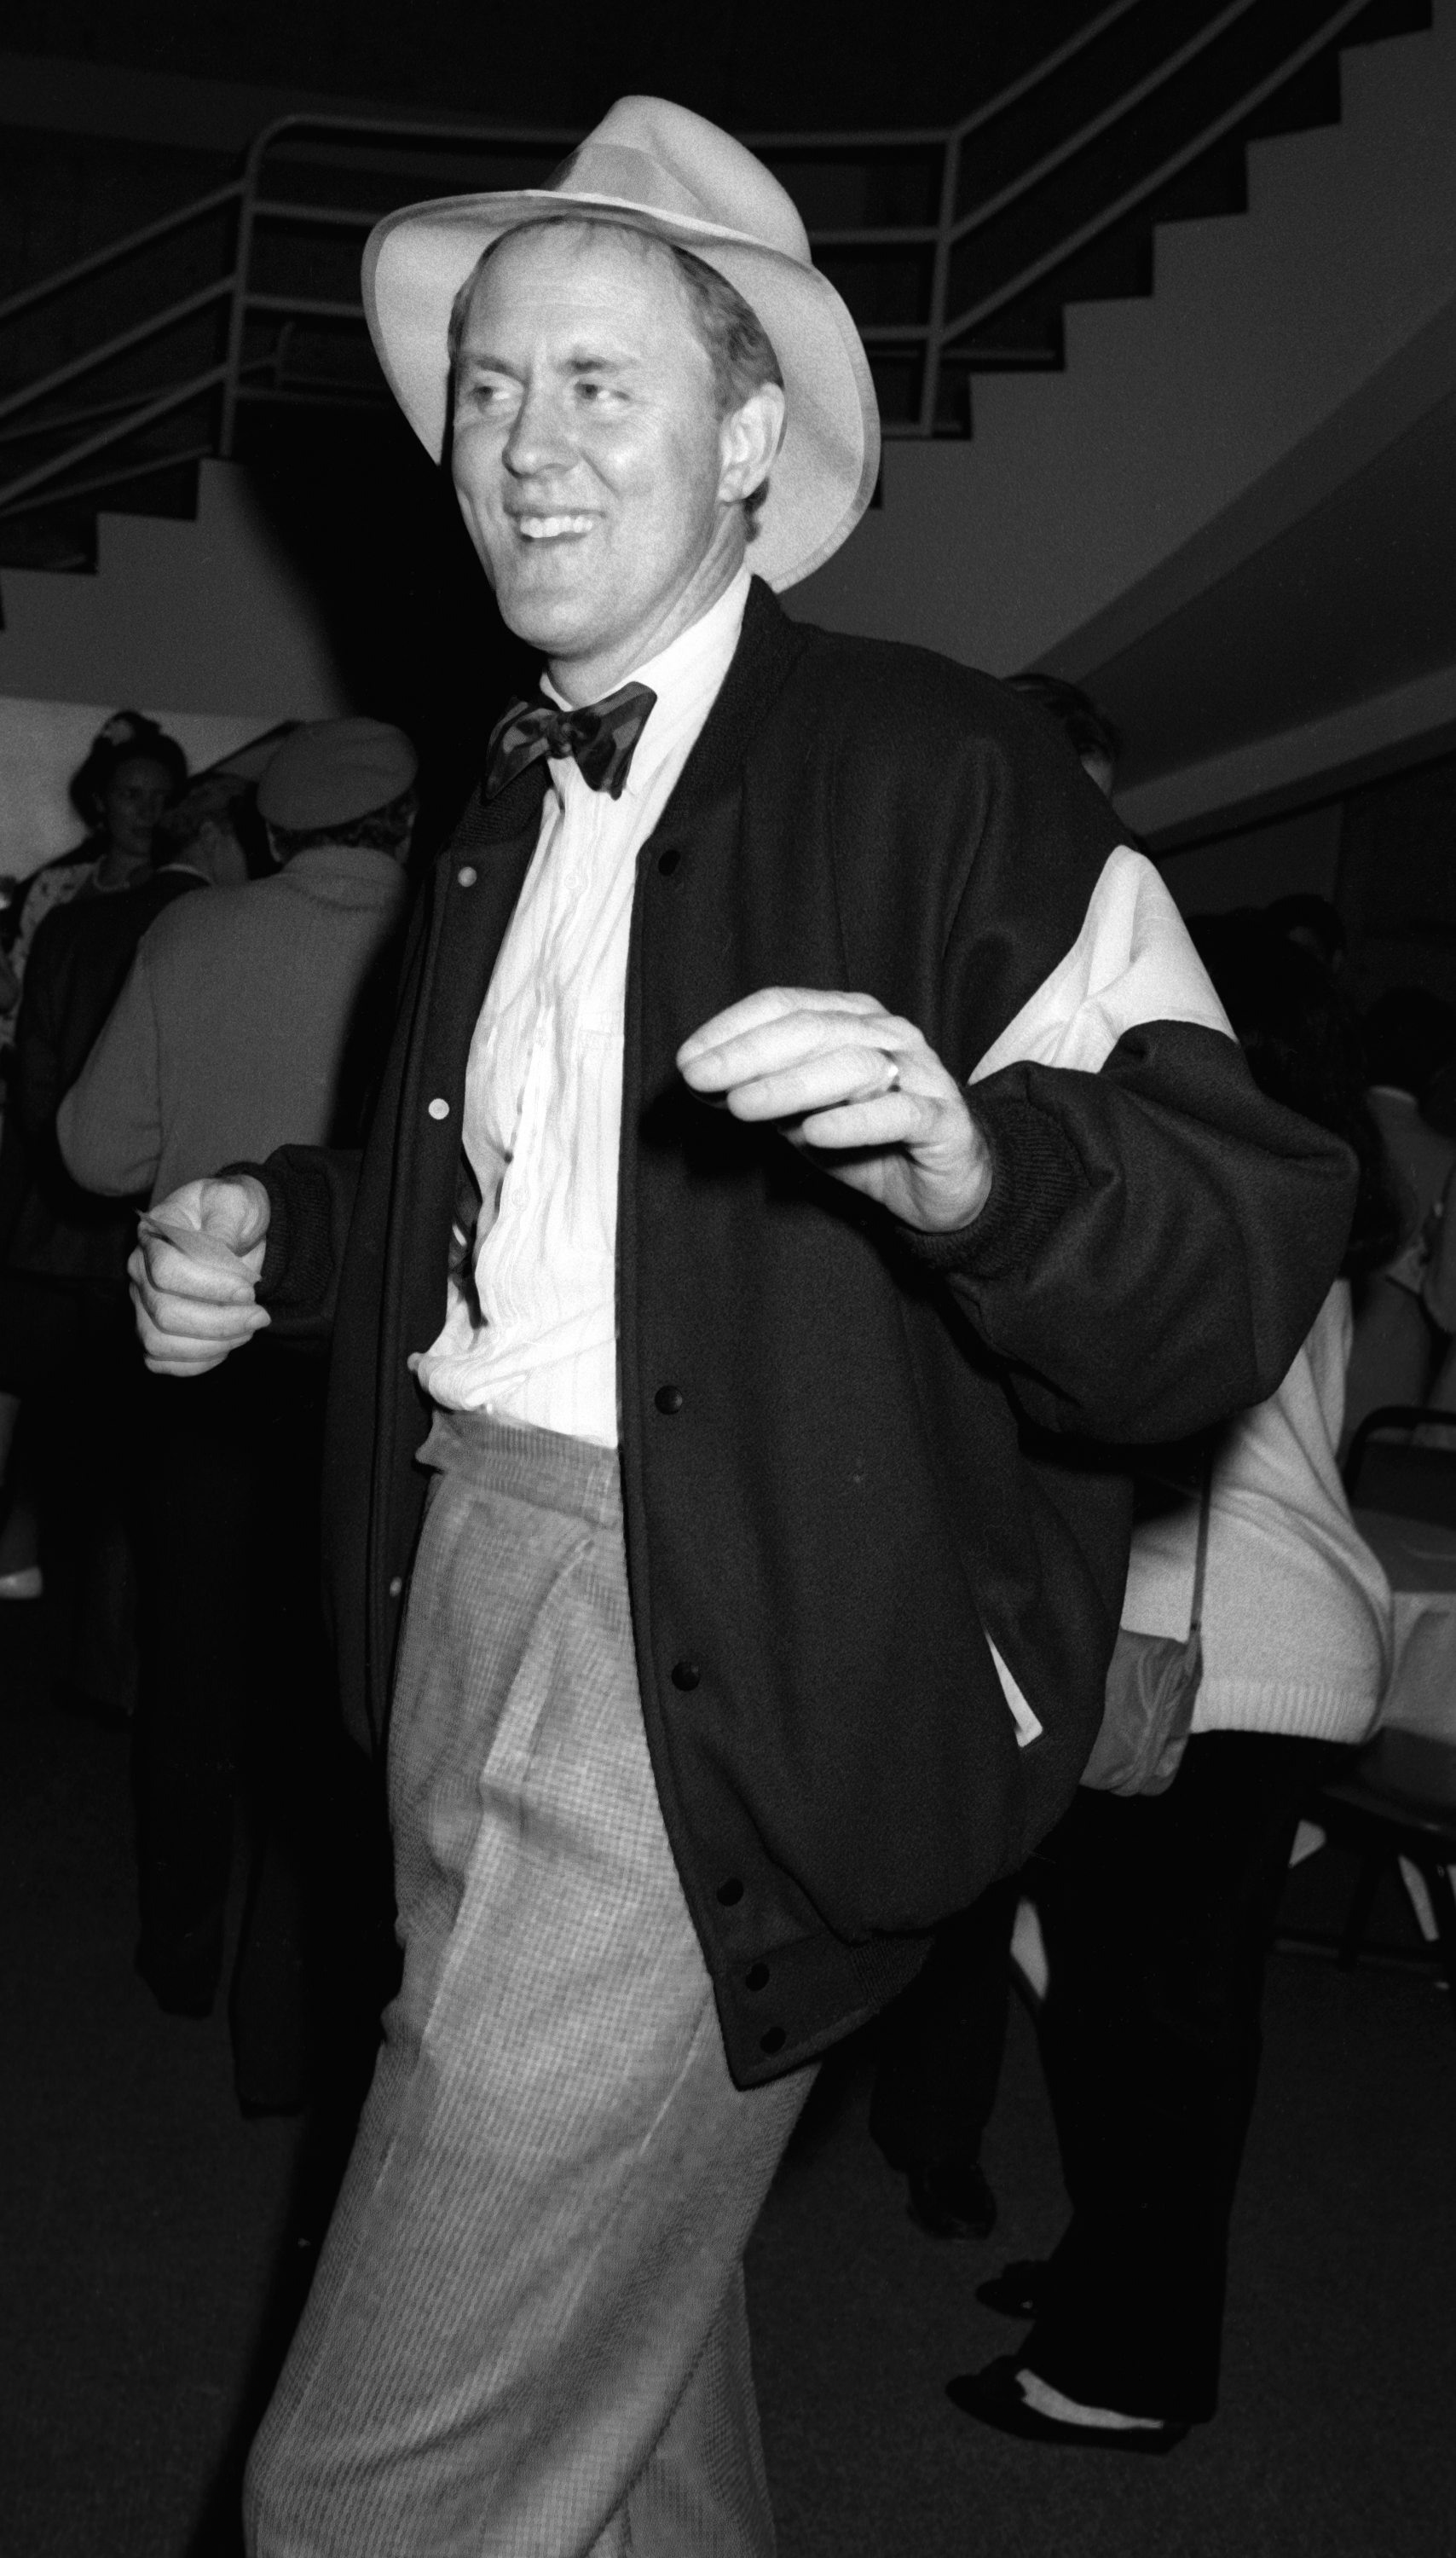 John Lithgow is pictured at the performance of "Hard Times" on March 23, 1987, at the Los Angeles Theater in Los Angeles, California | Source: Getty Images